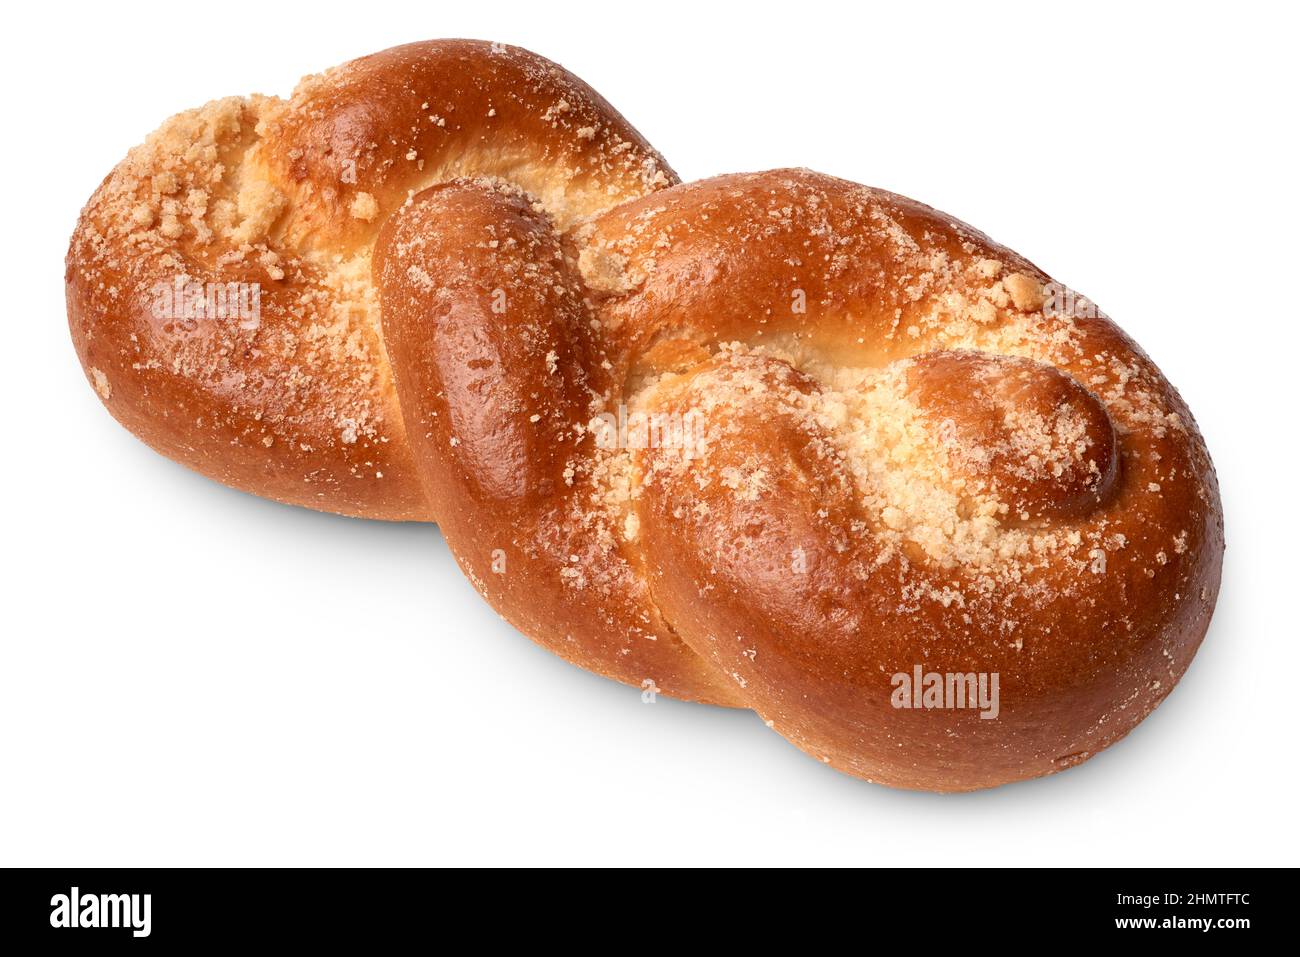 Isolated objects: traditional twisted wheat bun, on white background Stock Photo